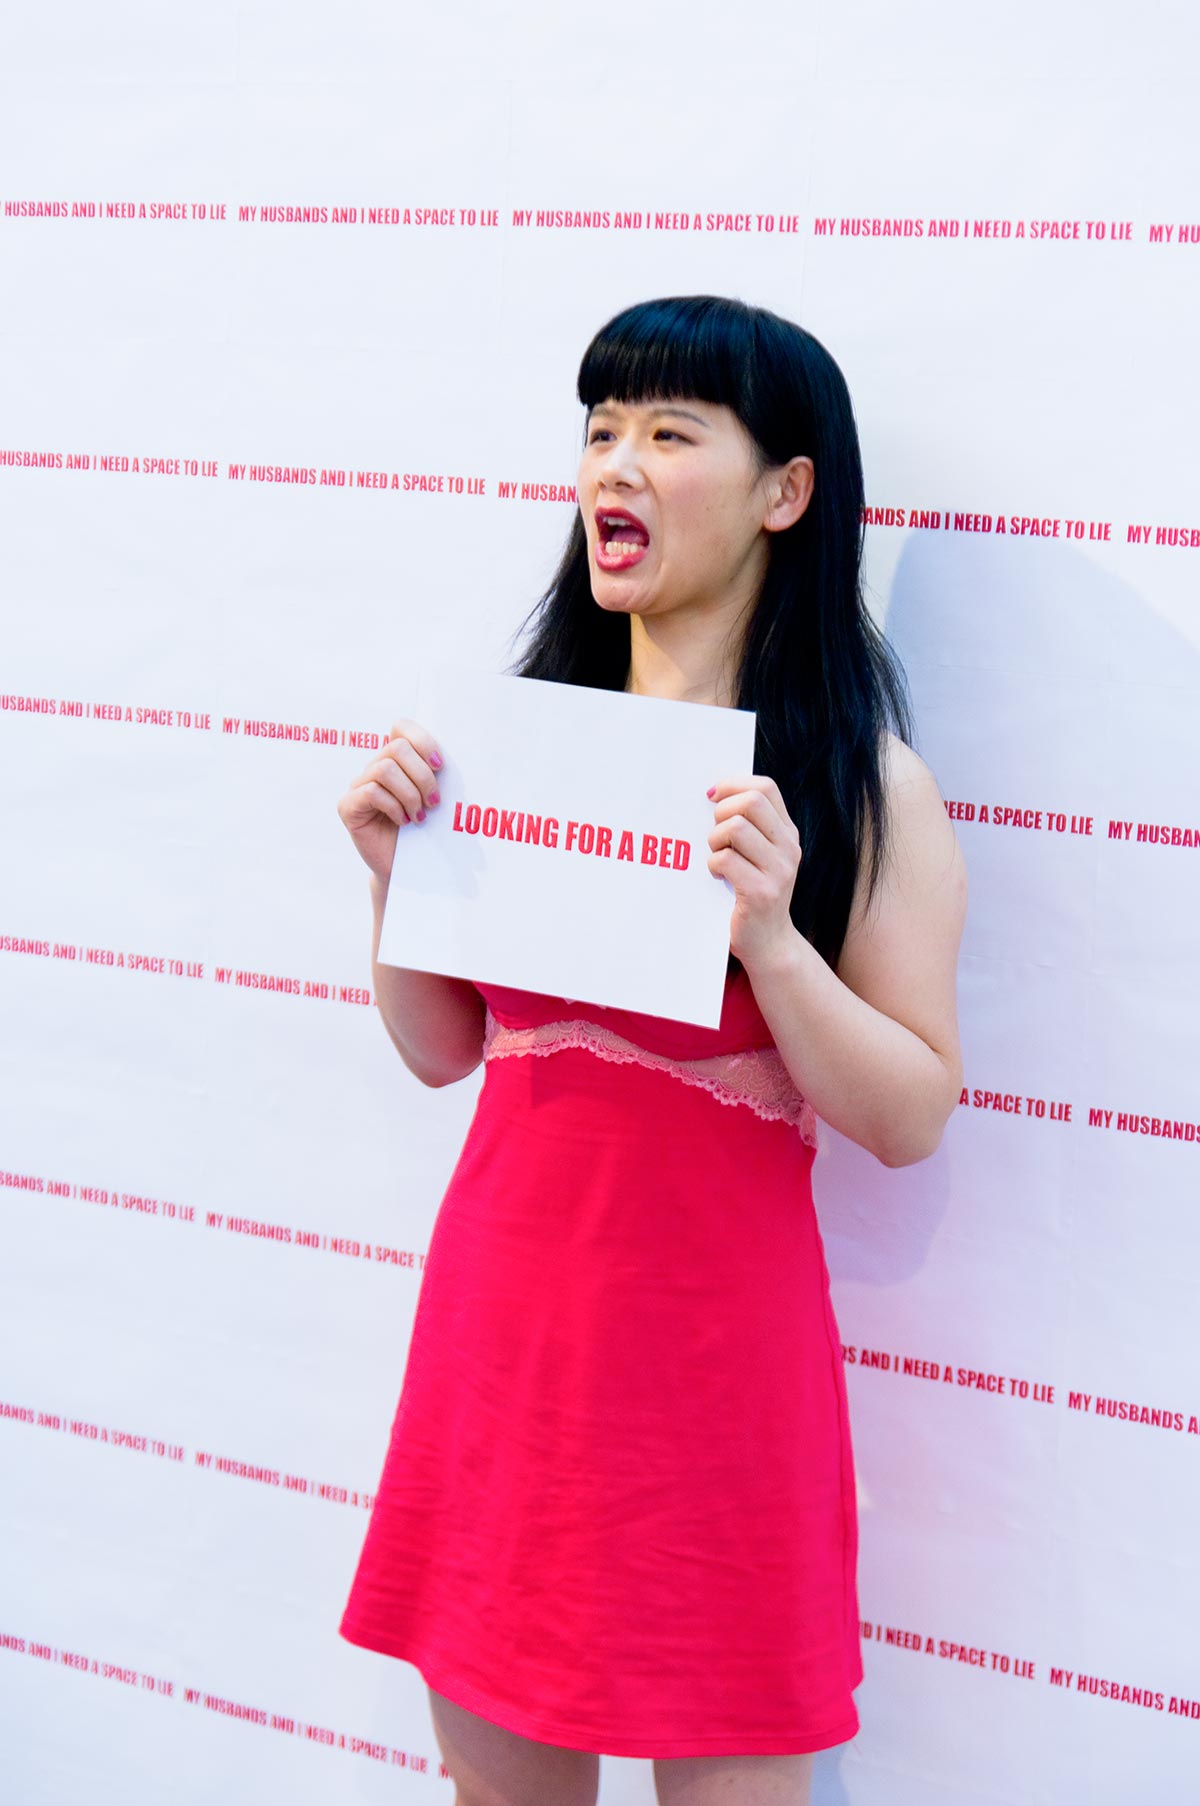 Chun Hua Catherine Dong shouted at audiences at Concourse Gallery in Vancouver for some money . She was looking for a bed and protesting again Emily Carr University not exhibiting her Husbands and I work at her Graduate Show in 2011